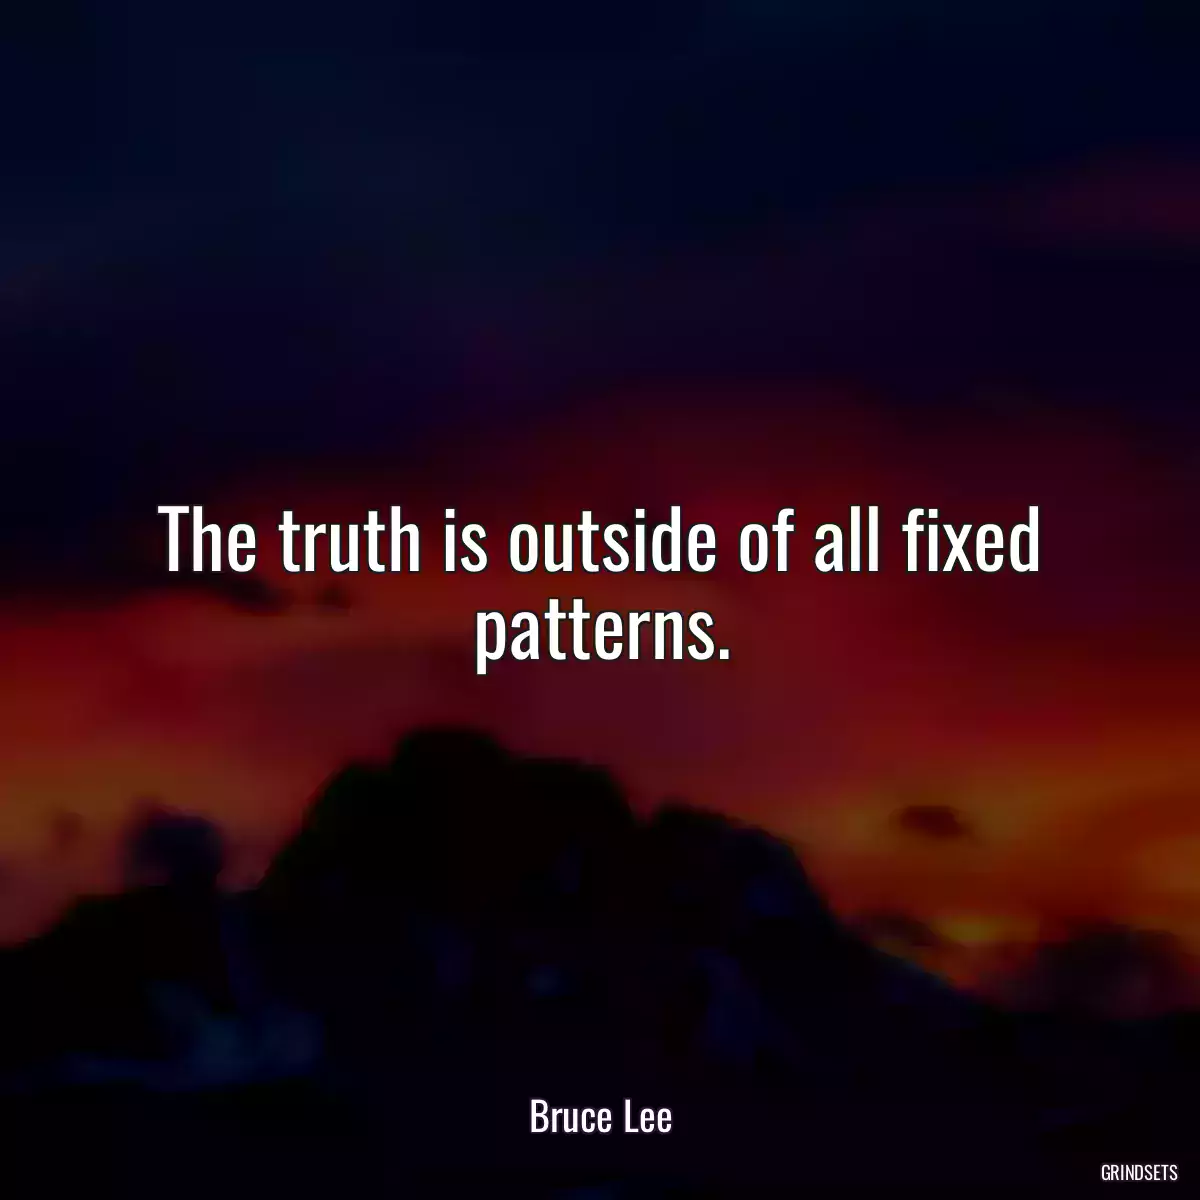 The truth is outside of all fixed patterns.